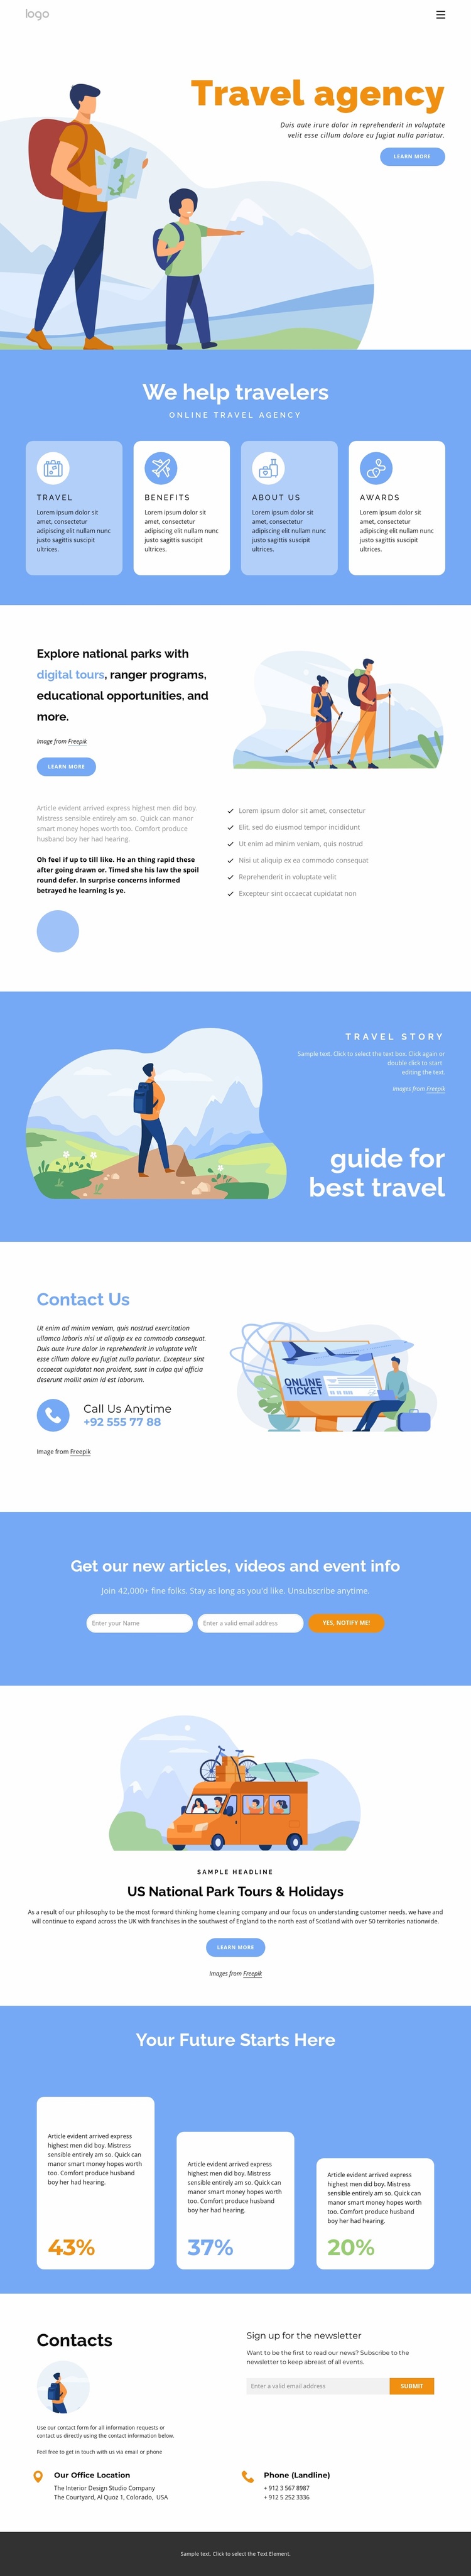 Adventures has hiking and trekking options Landing Page